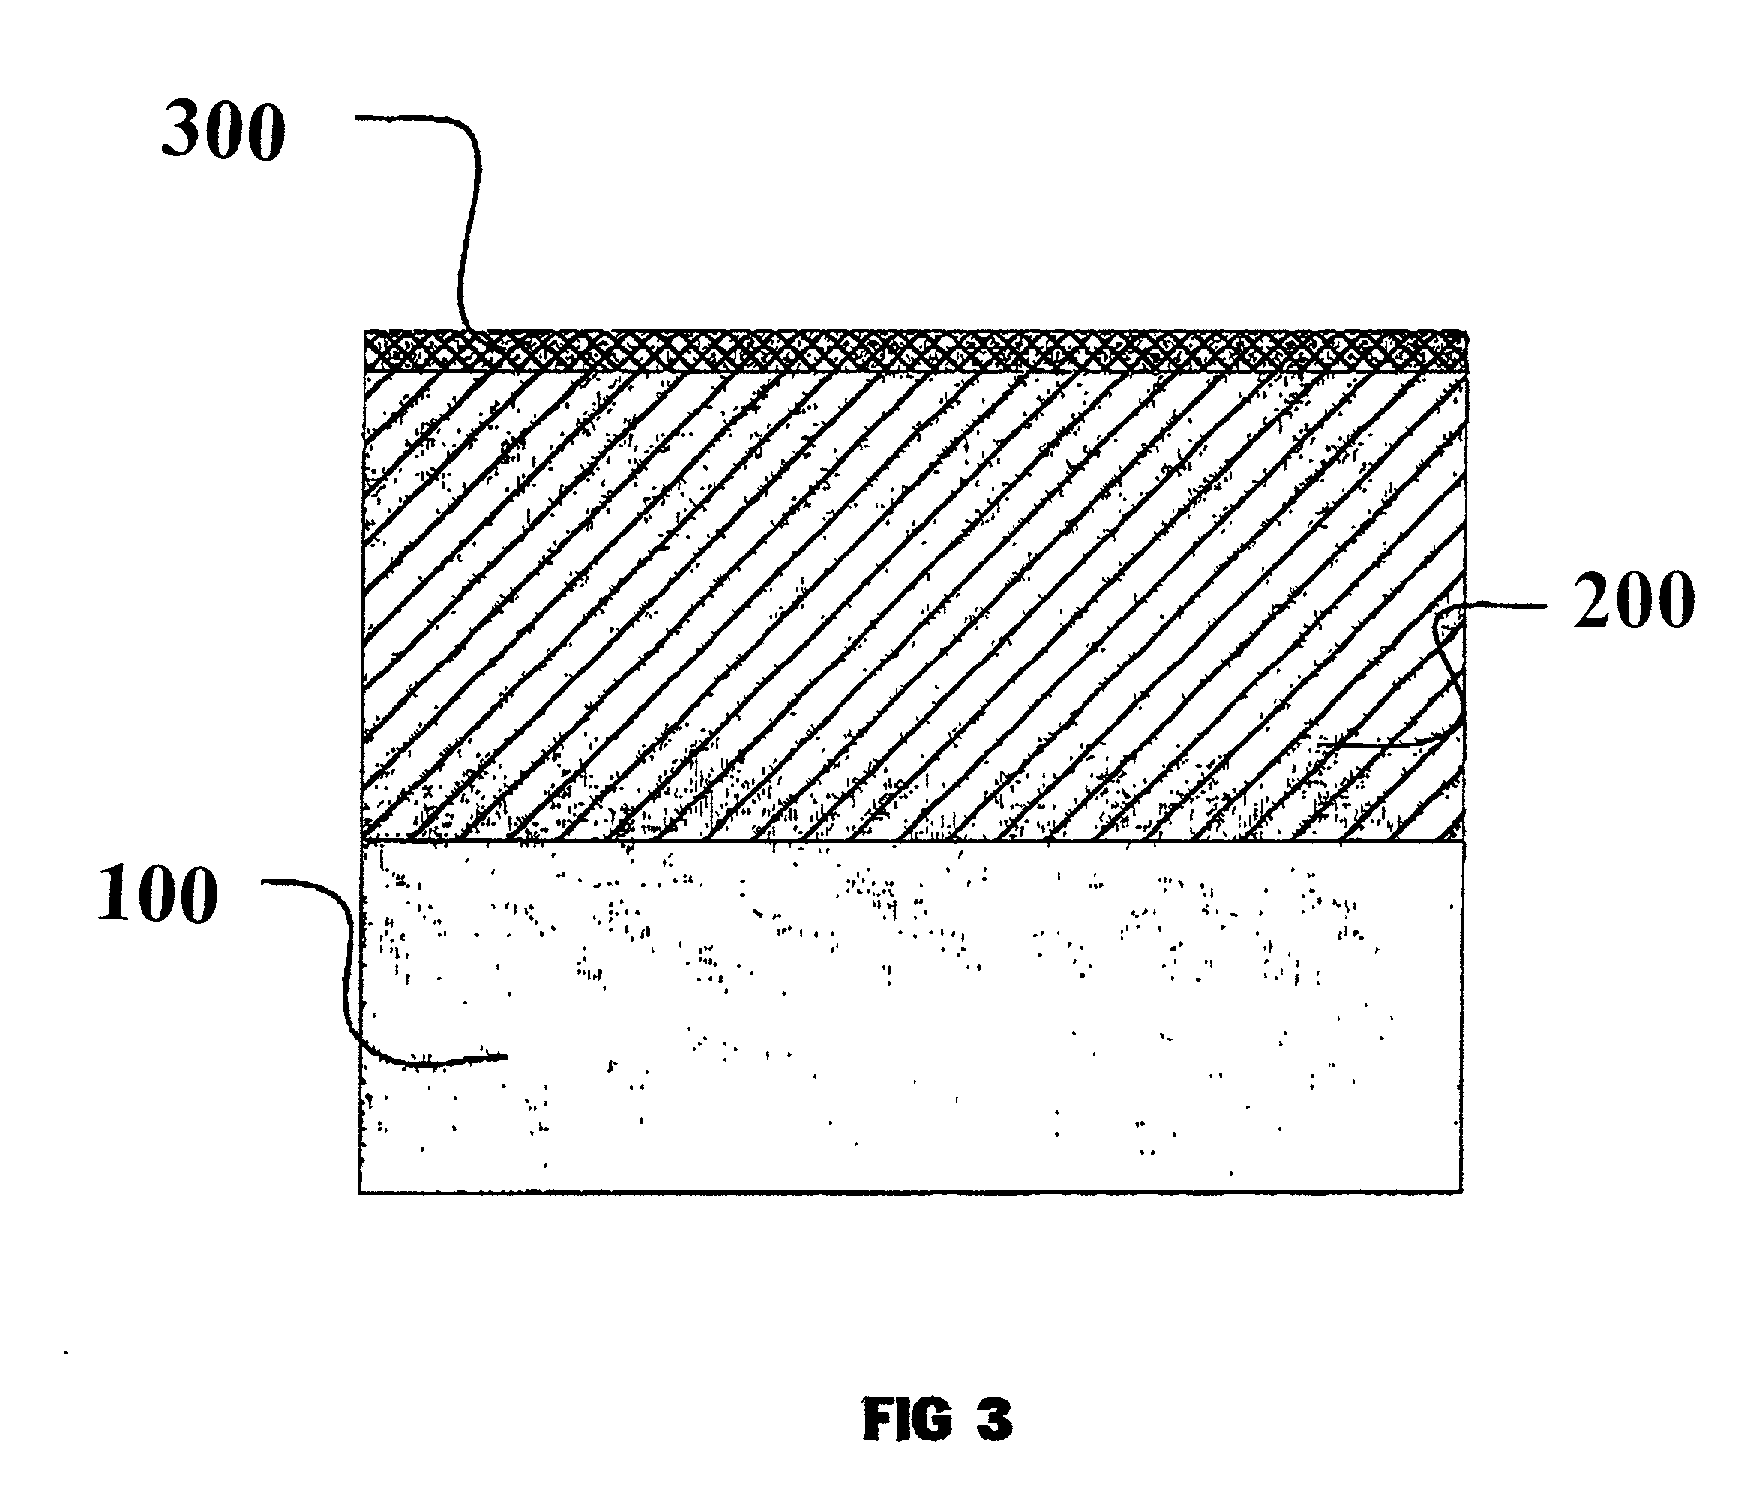 Process and device for forming ceramic coatings on metals and alloys, and coatings produced by this process